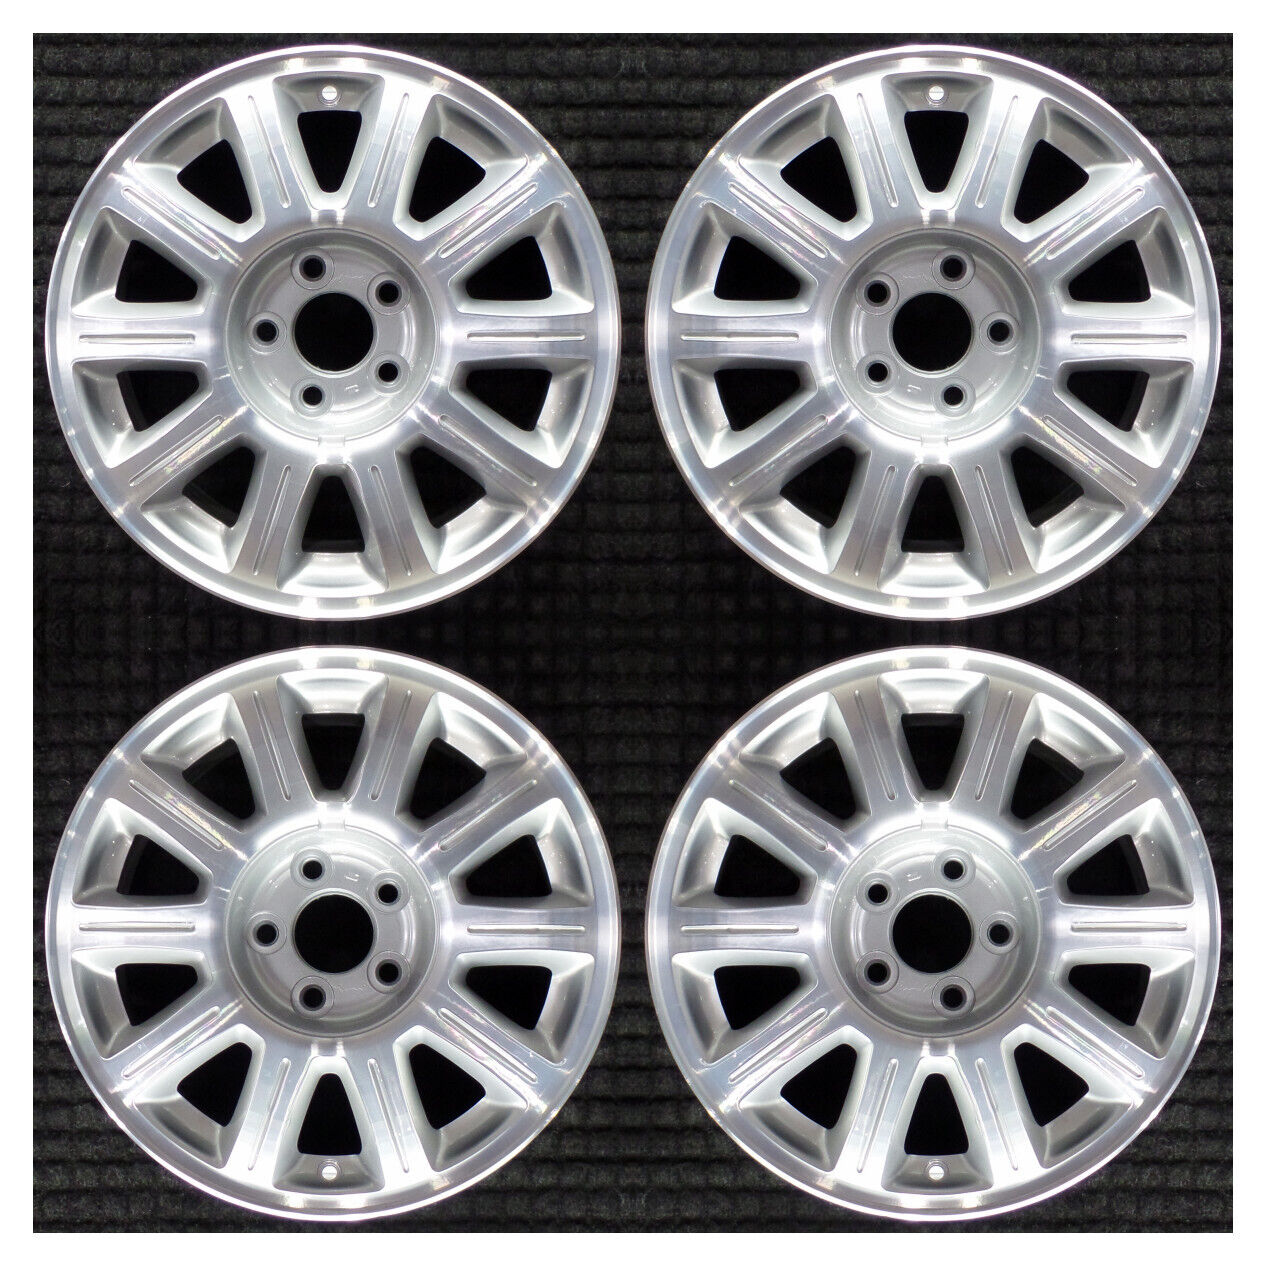 Set 1999 2000 2001 2002 Lincoln Continental OEM Machined Silver Wheels Rims 3309